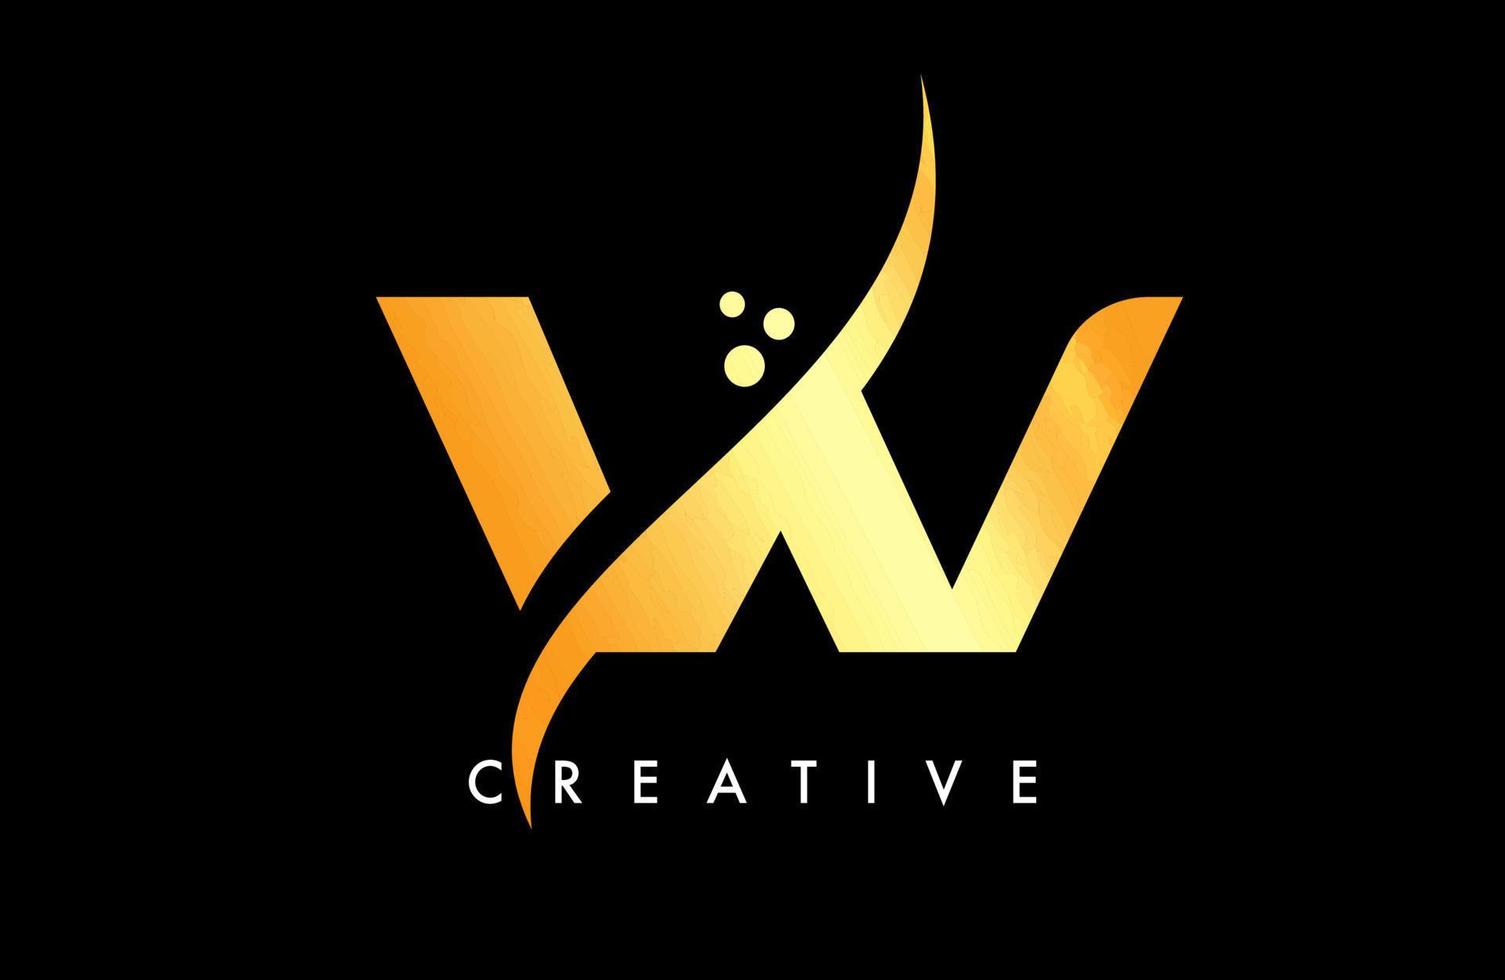 Golden W Letter Logo Design with Elegant Creative Swoosh and Dots Vector